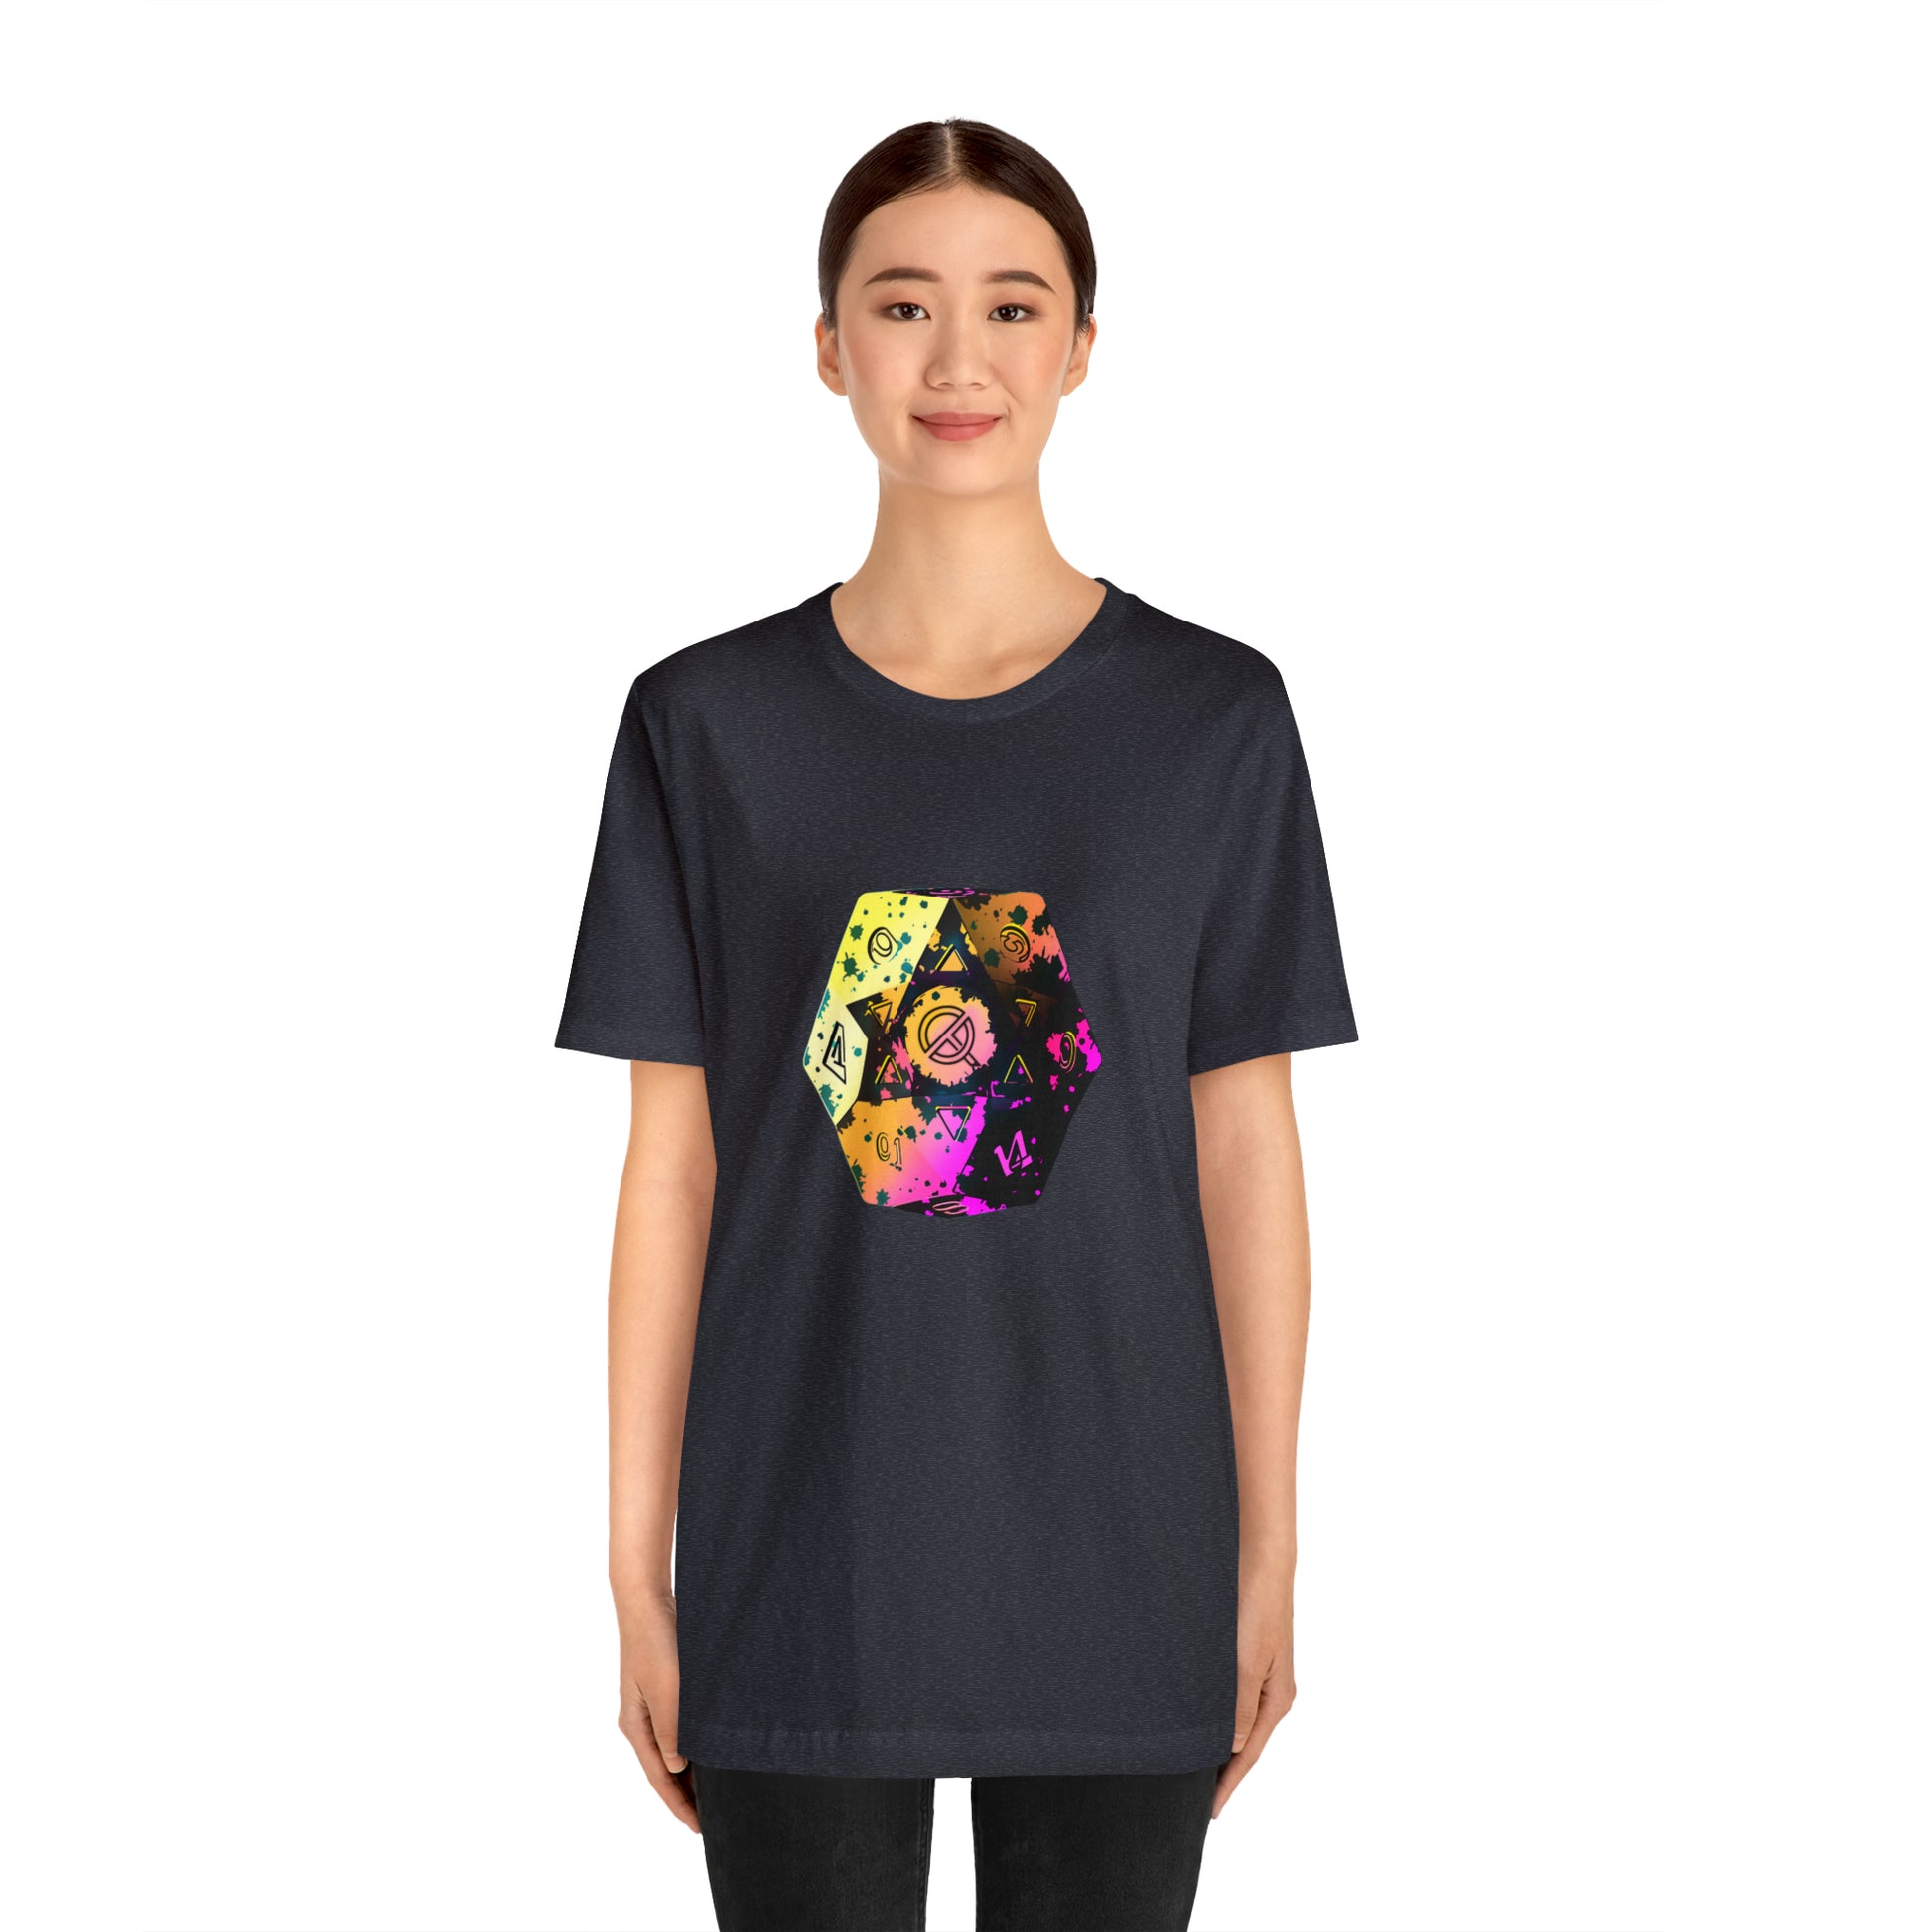 heather-navy-quest-thread-tee-shirt-with-large-neon-d20-dice-on-center